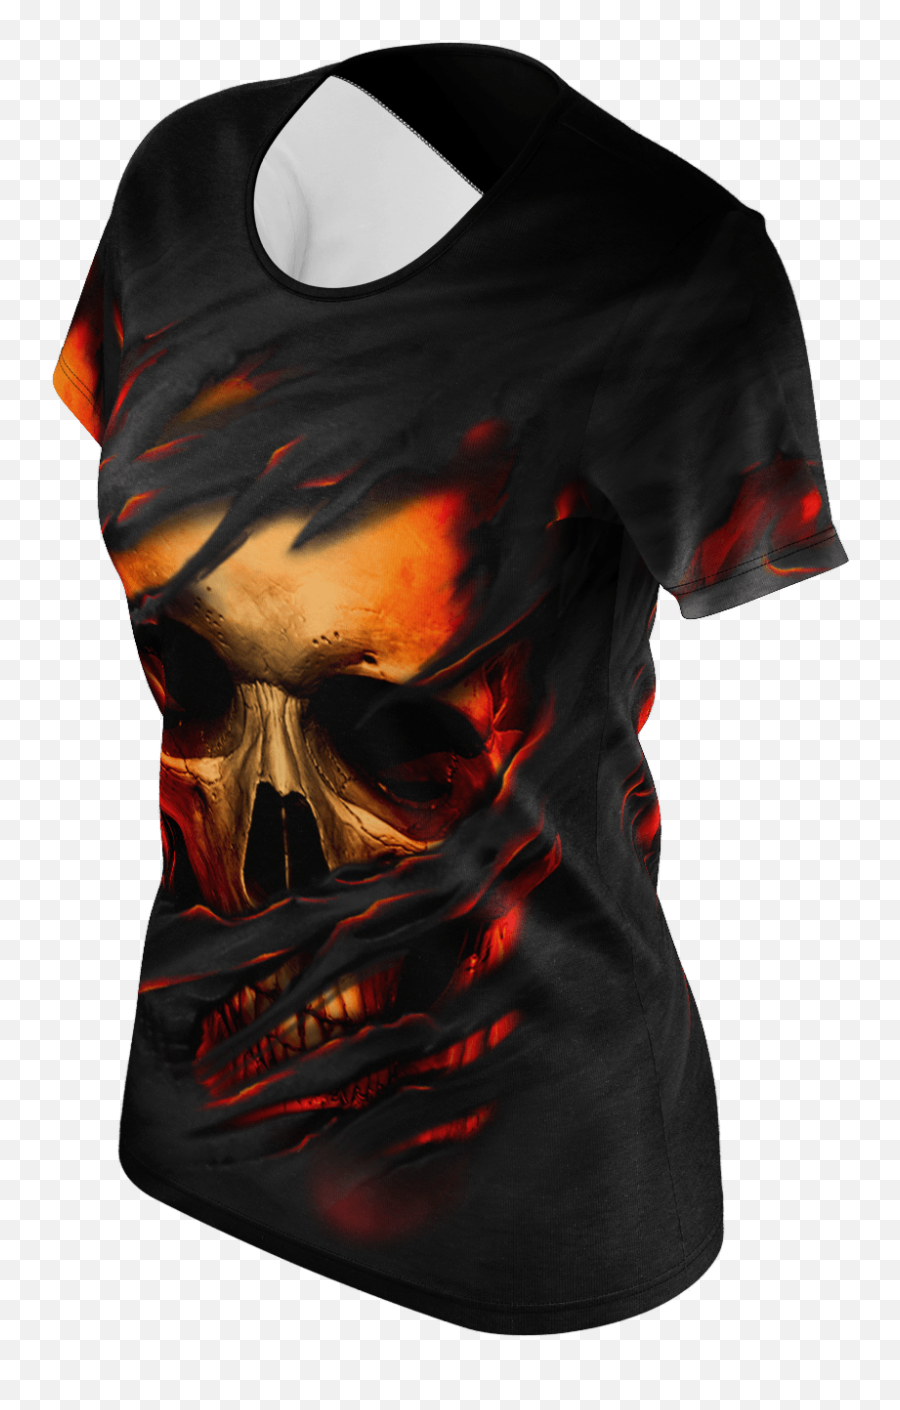 Download Ripped Face Skull Womenu0027s T - Shirt Blouse Png Skull,Skull Face Png